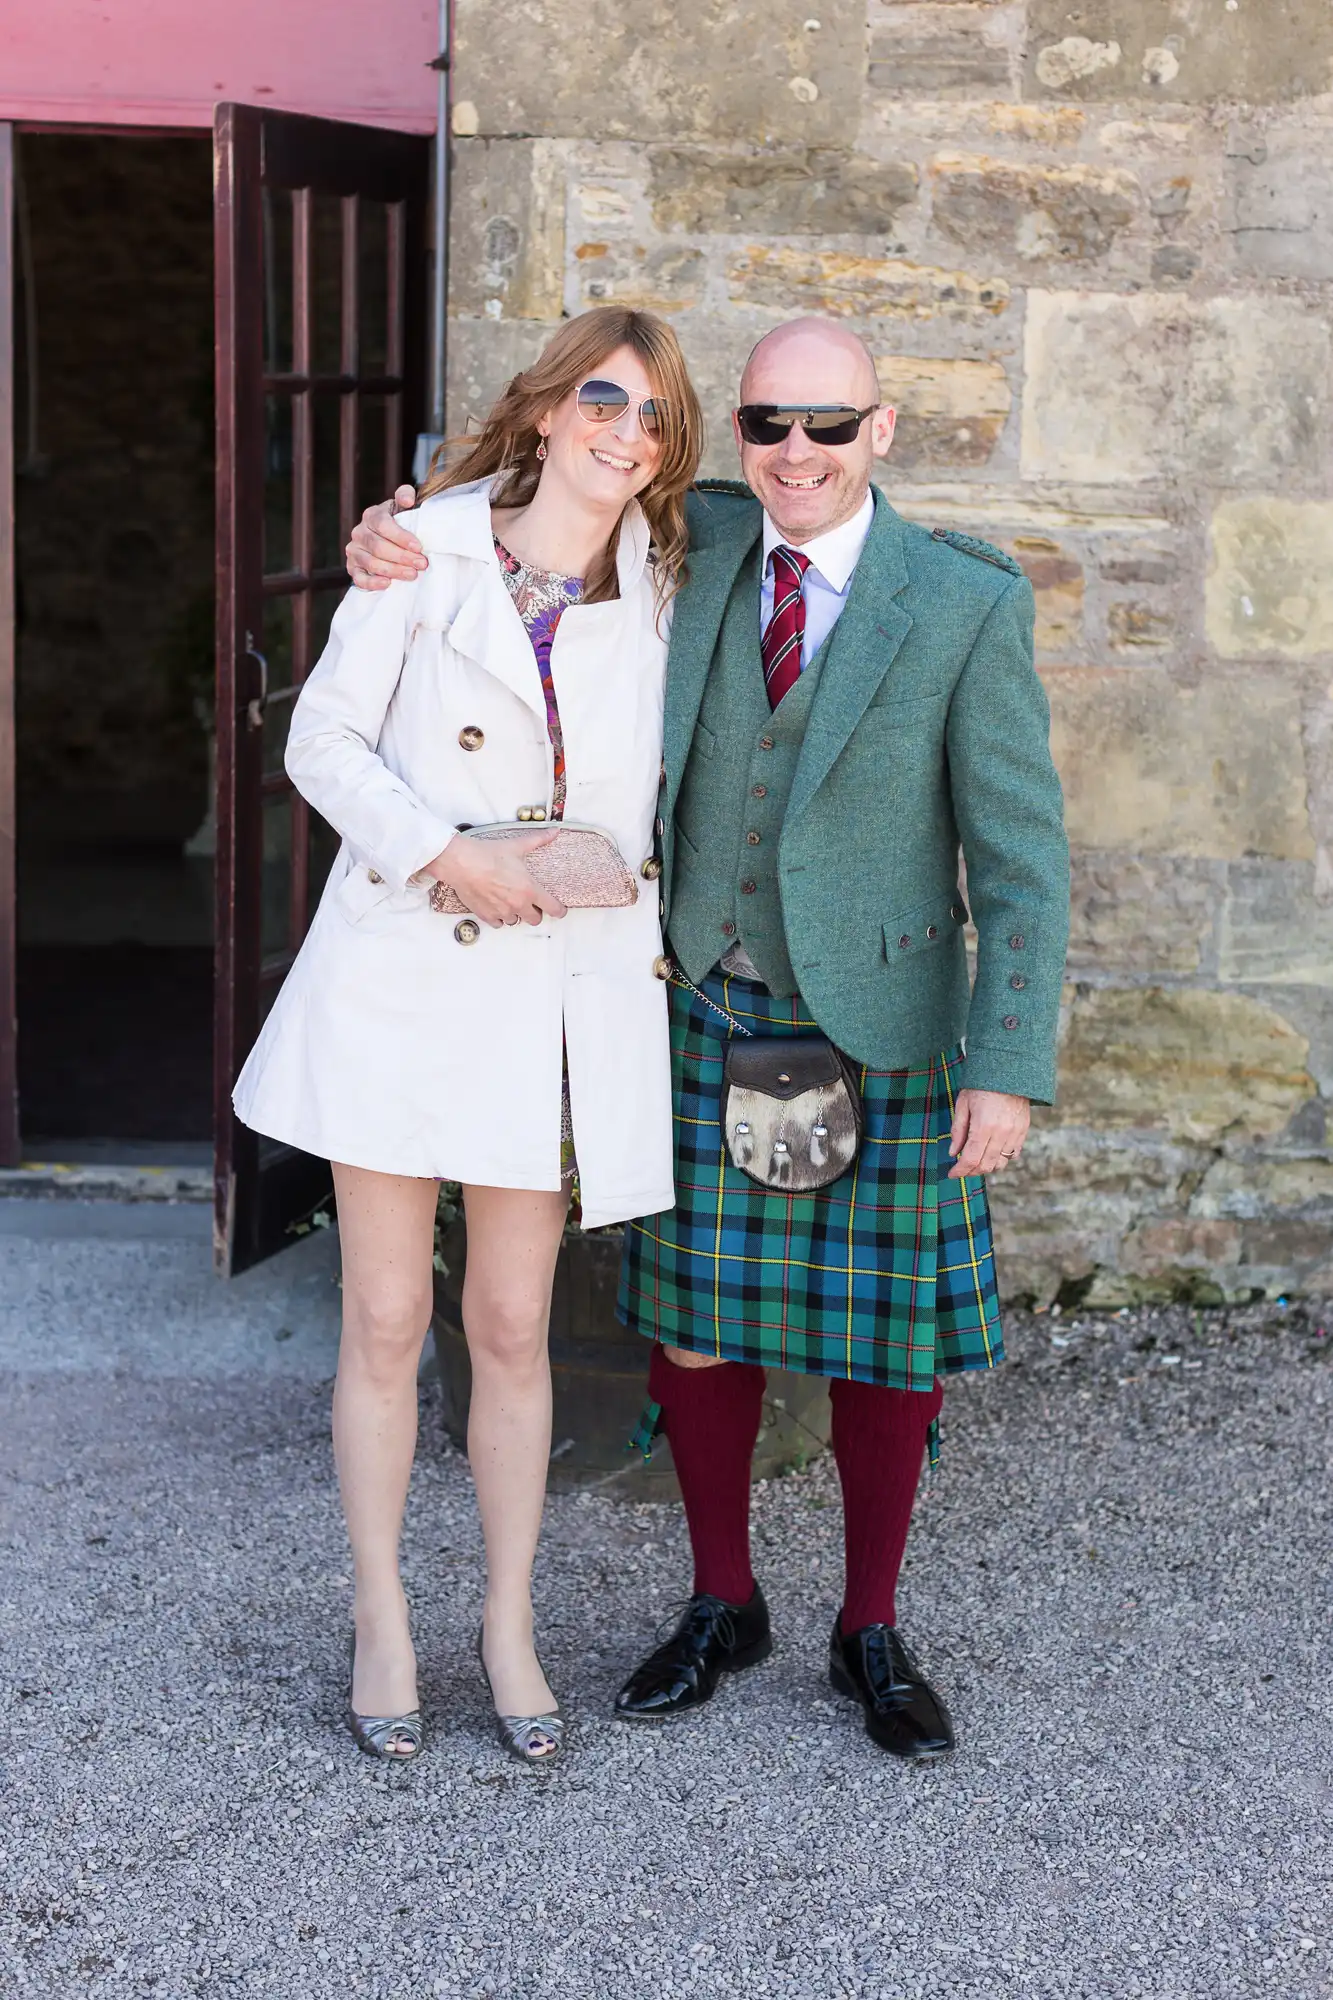 A woman in a white trench coat and a man in a green blazer and kilt smiling arm-in-arm outside a stone building.